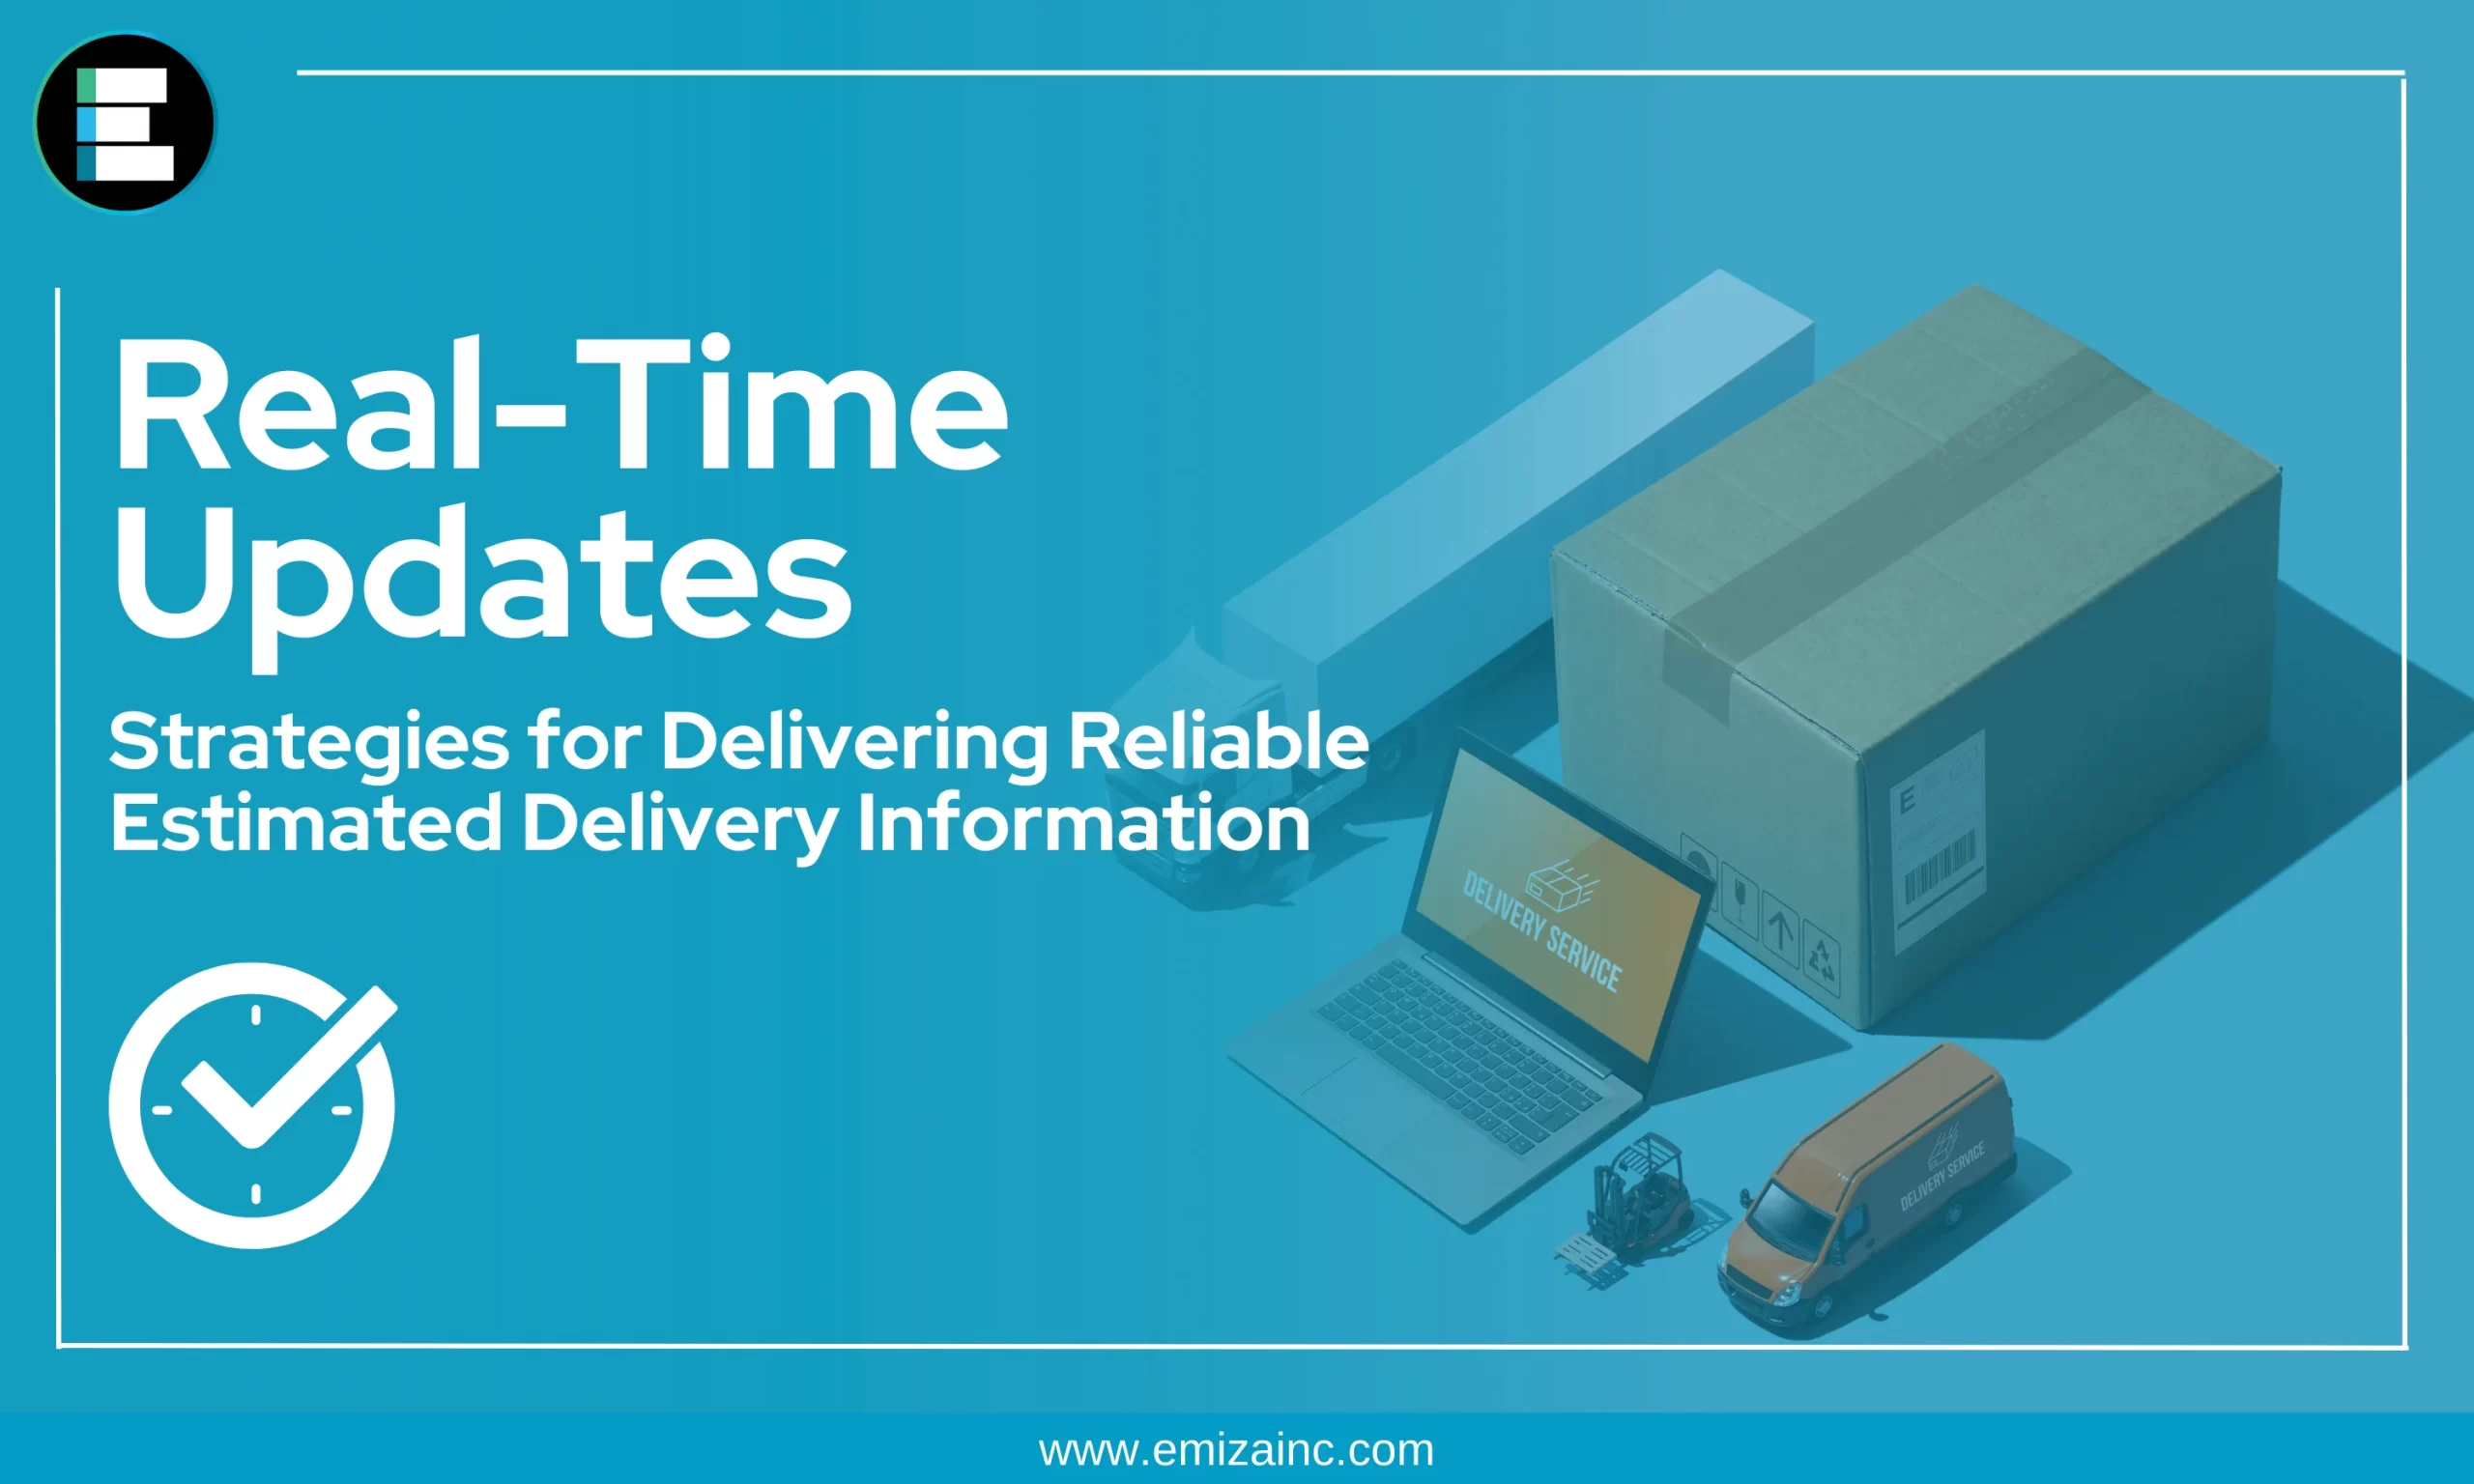 Real-Time Updates: Strategies for Delivering Reliable Estimated Delivery Information